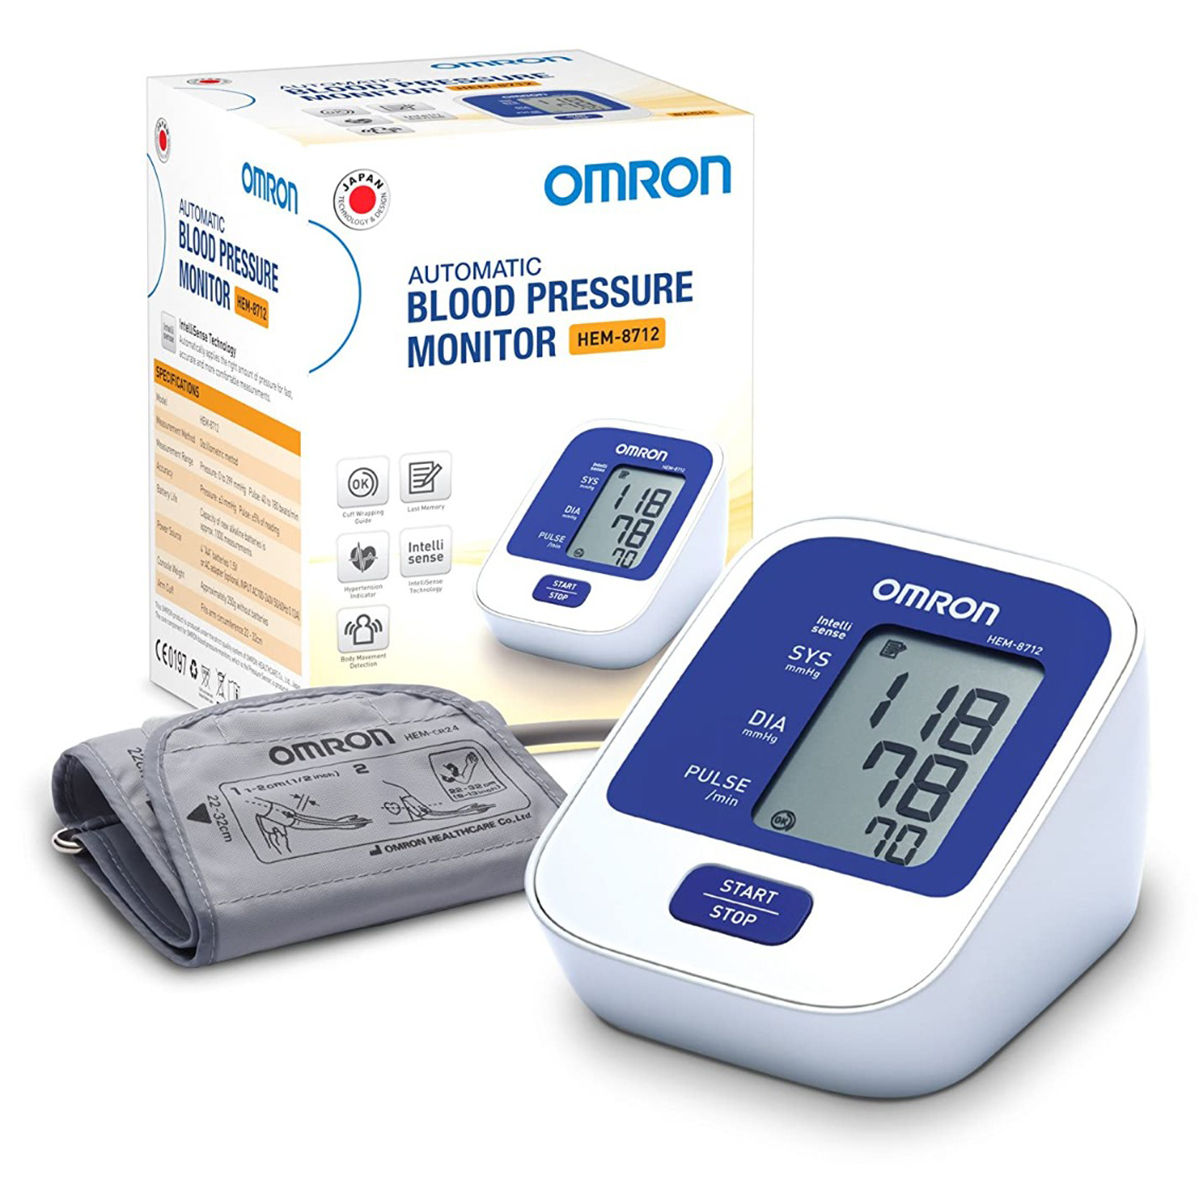 Buy Omron Automatic Blood Pressure Monitor HEM-8712, 1 Count Online